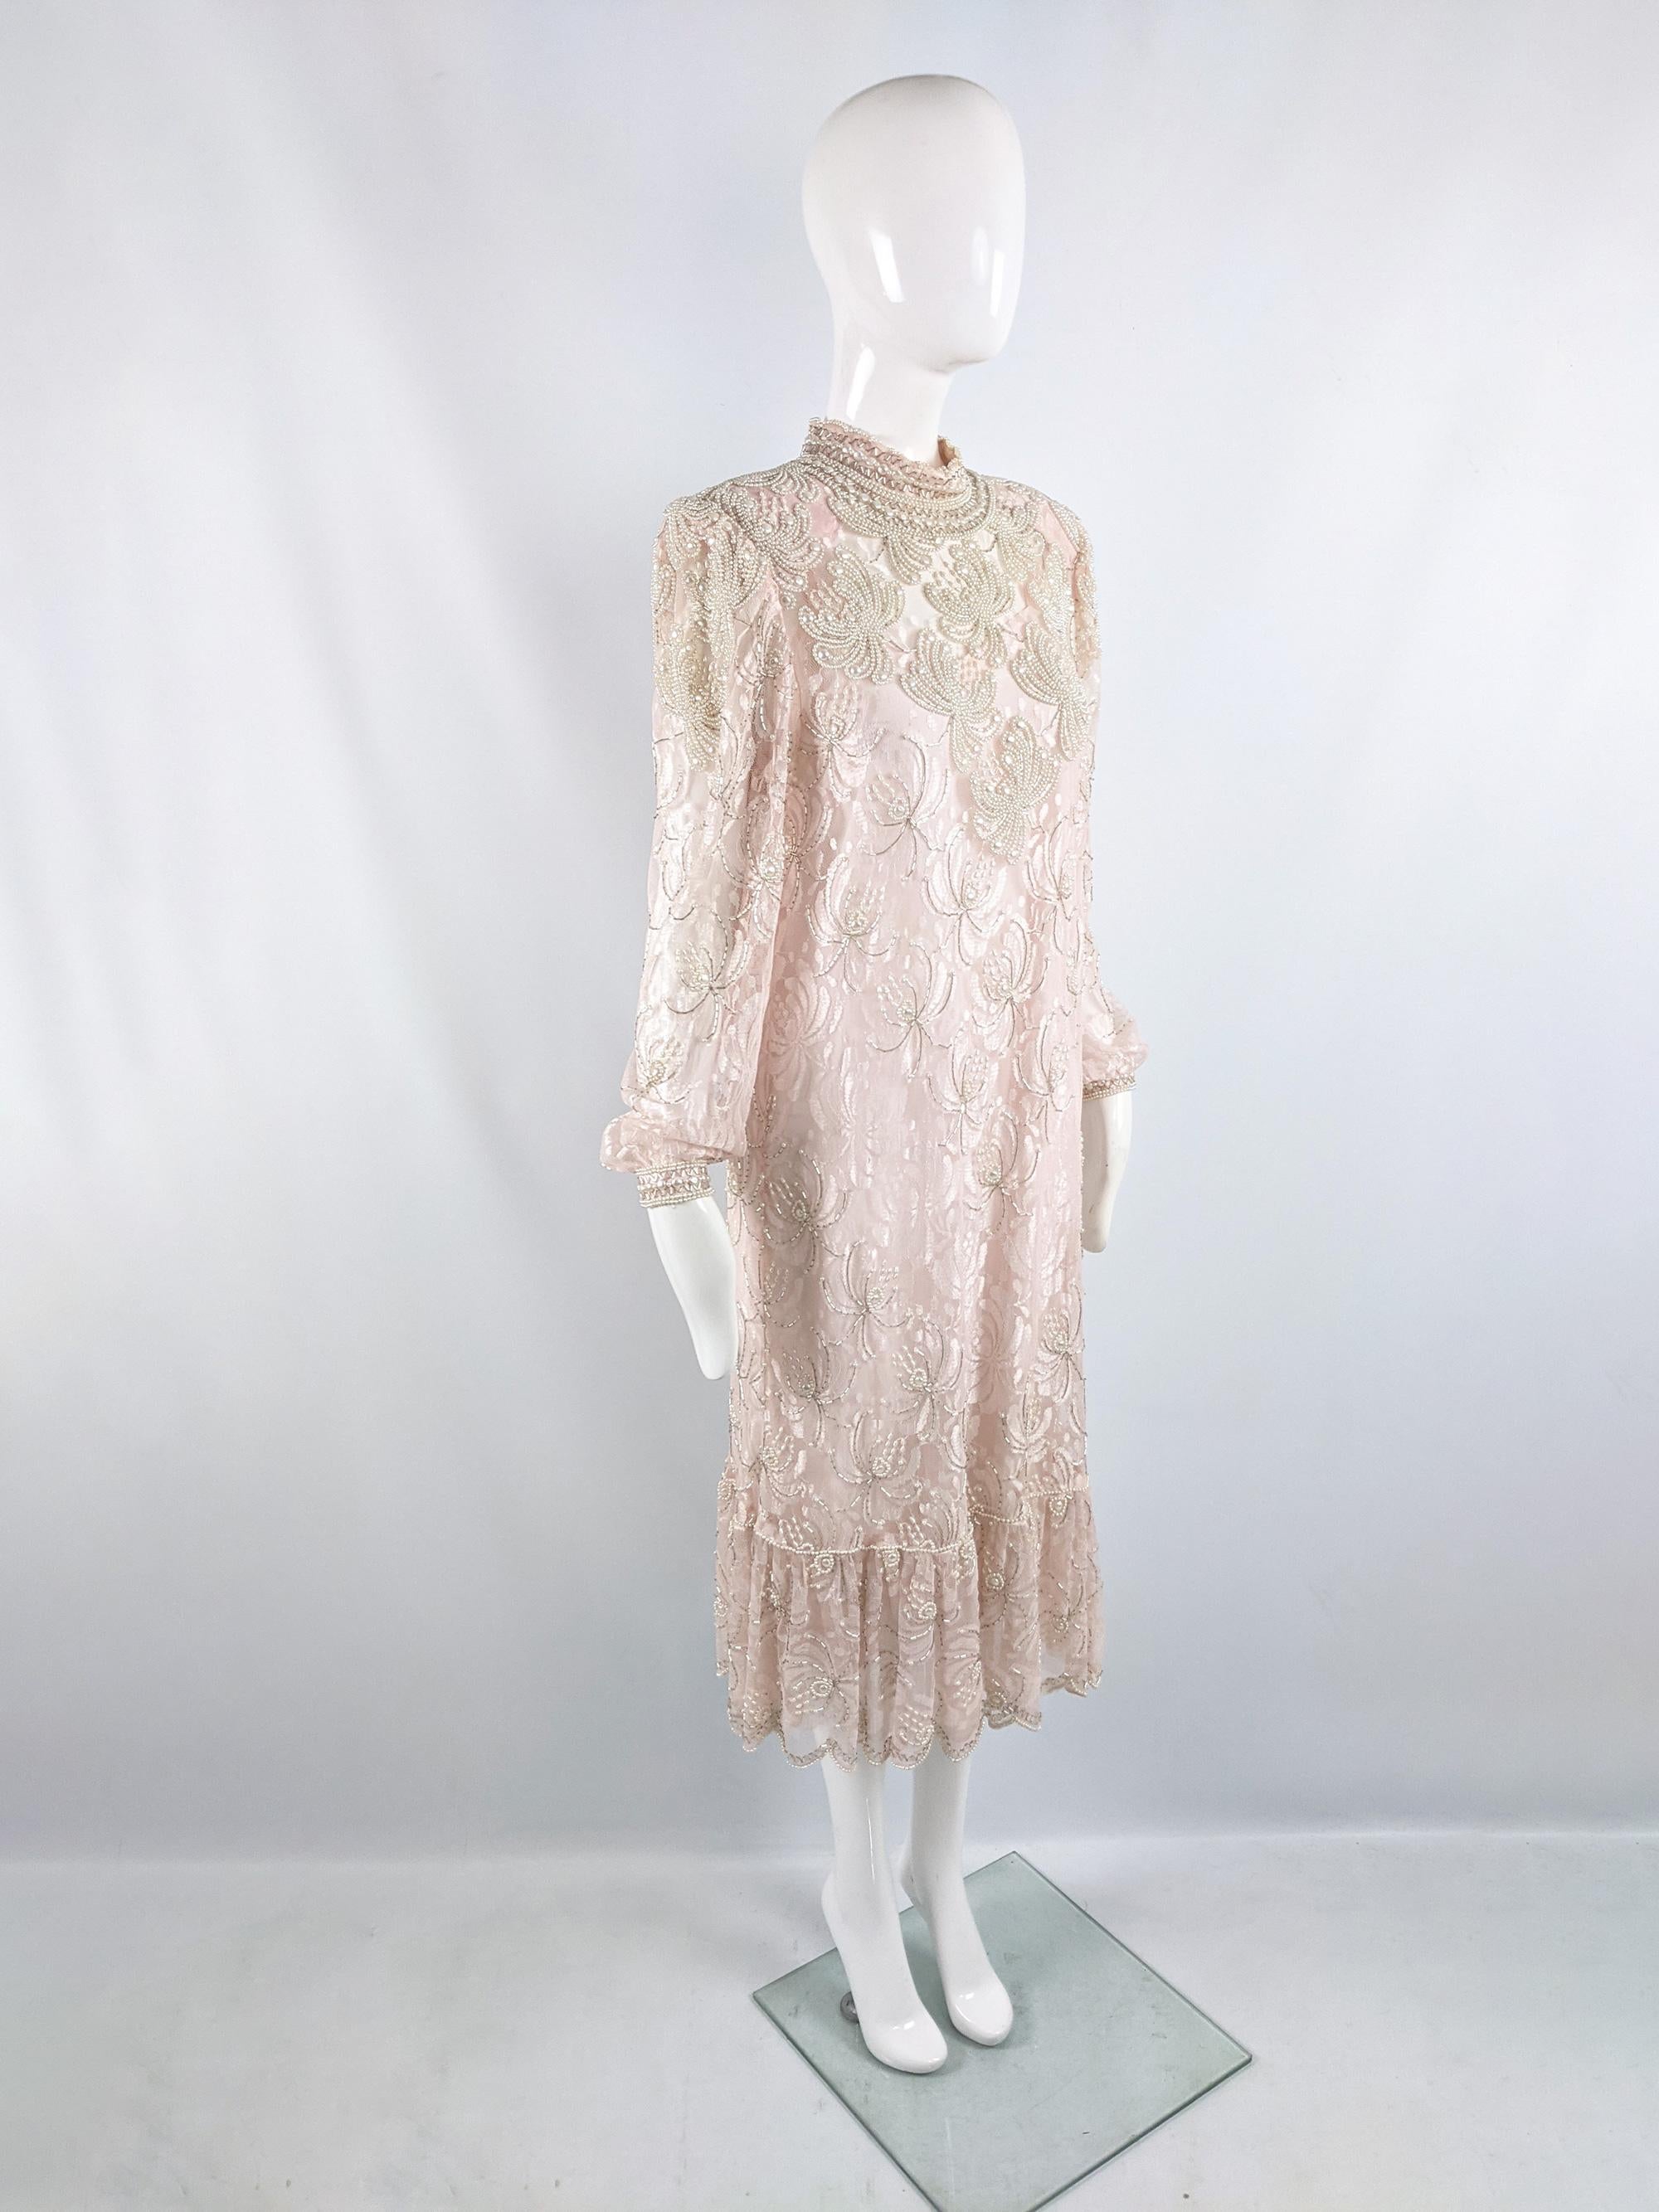 Vintage 80s Pink Sheer Lace Heavily Beaded Shoulder Pads Dress with Slip, 1980s In Good Condition For Sale In Doncaster, South Yorkshire